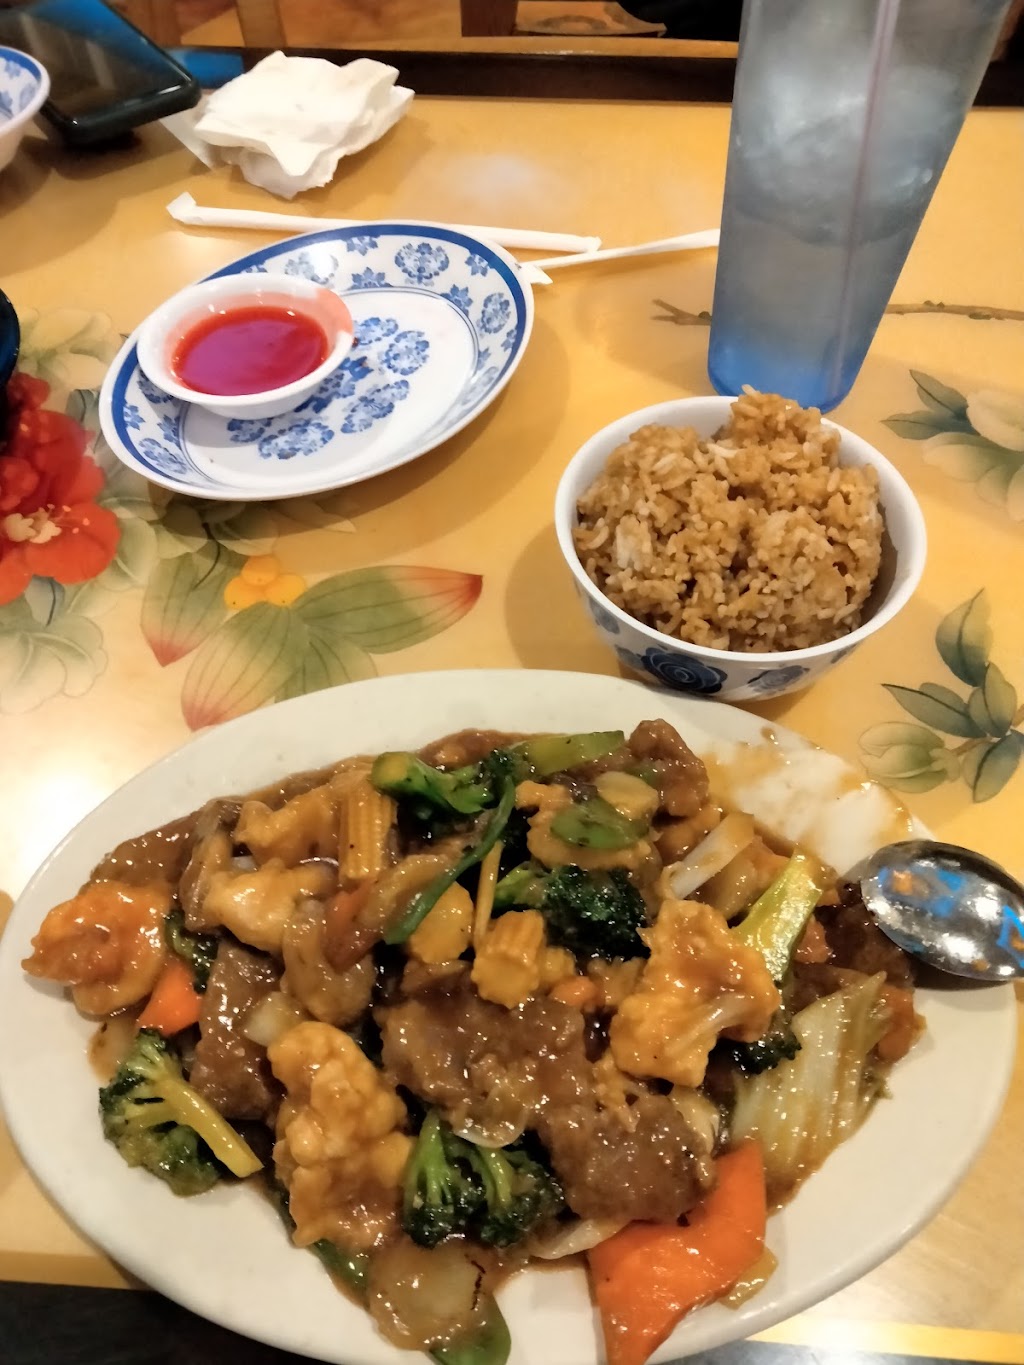 Chinese Dragon | 1019 State Hwy 71 W, Bastrop, TX 78602, USA | Phone: (512) 985-5419